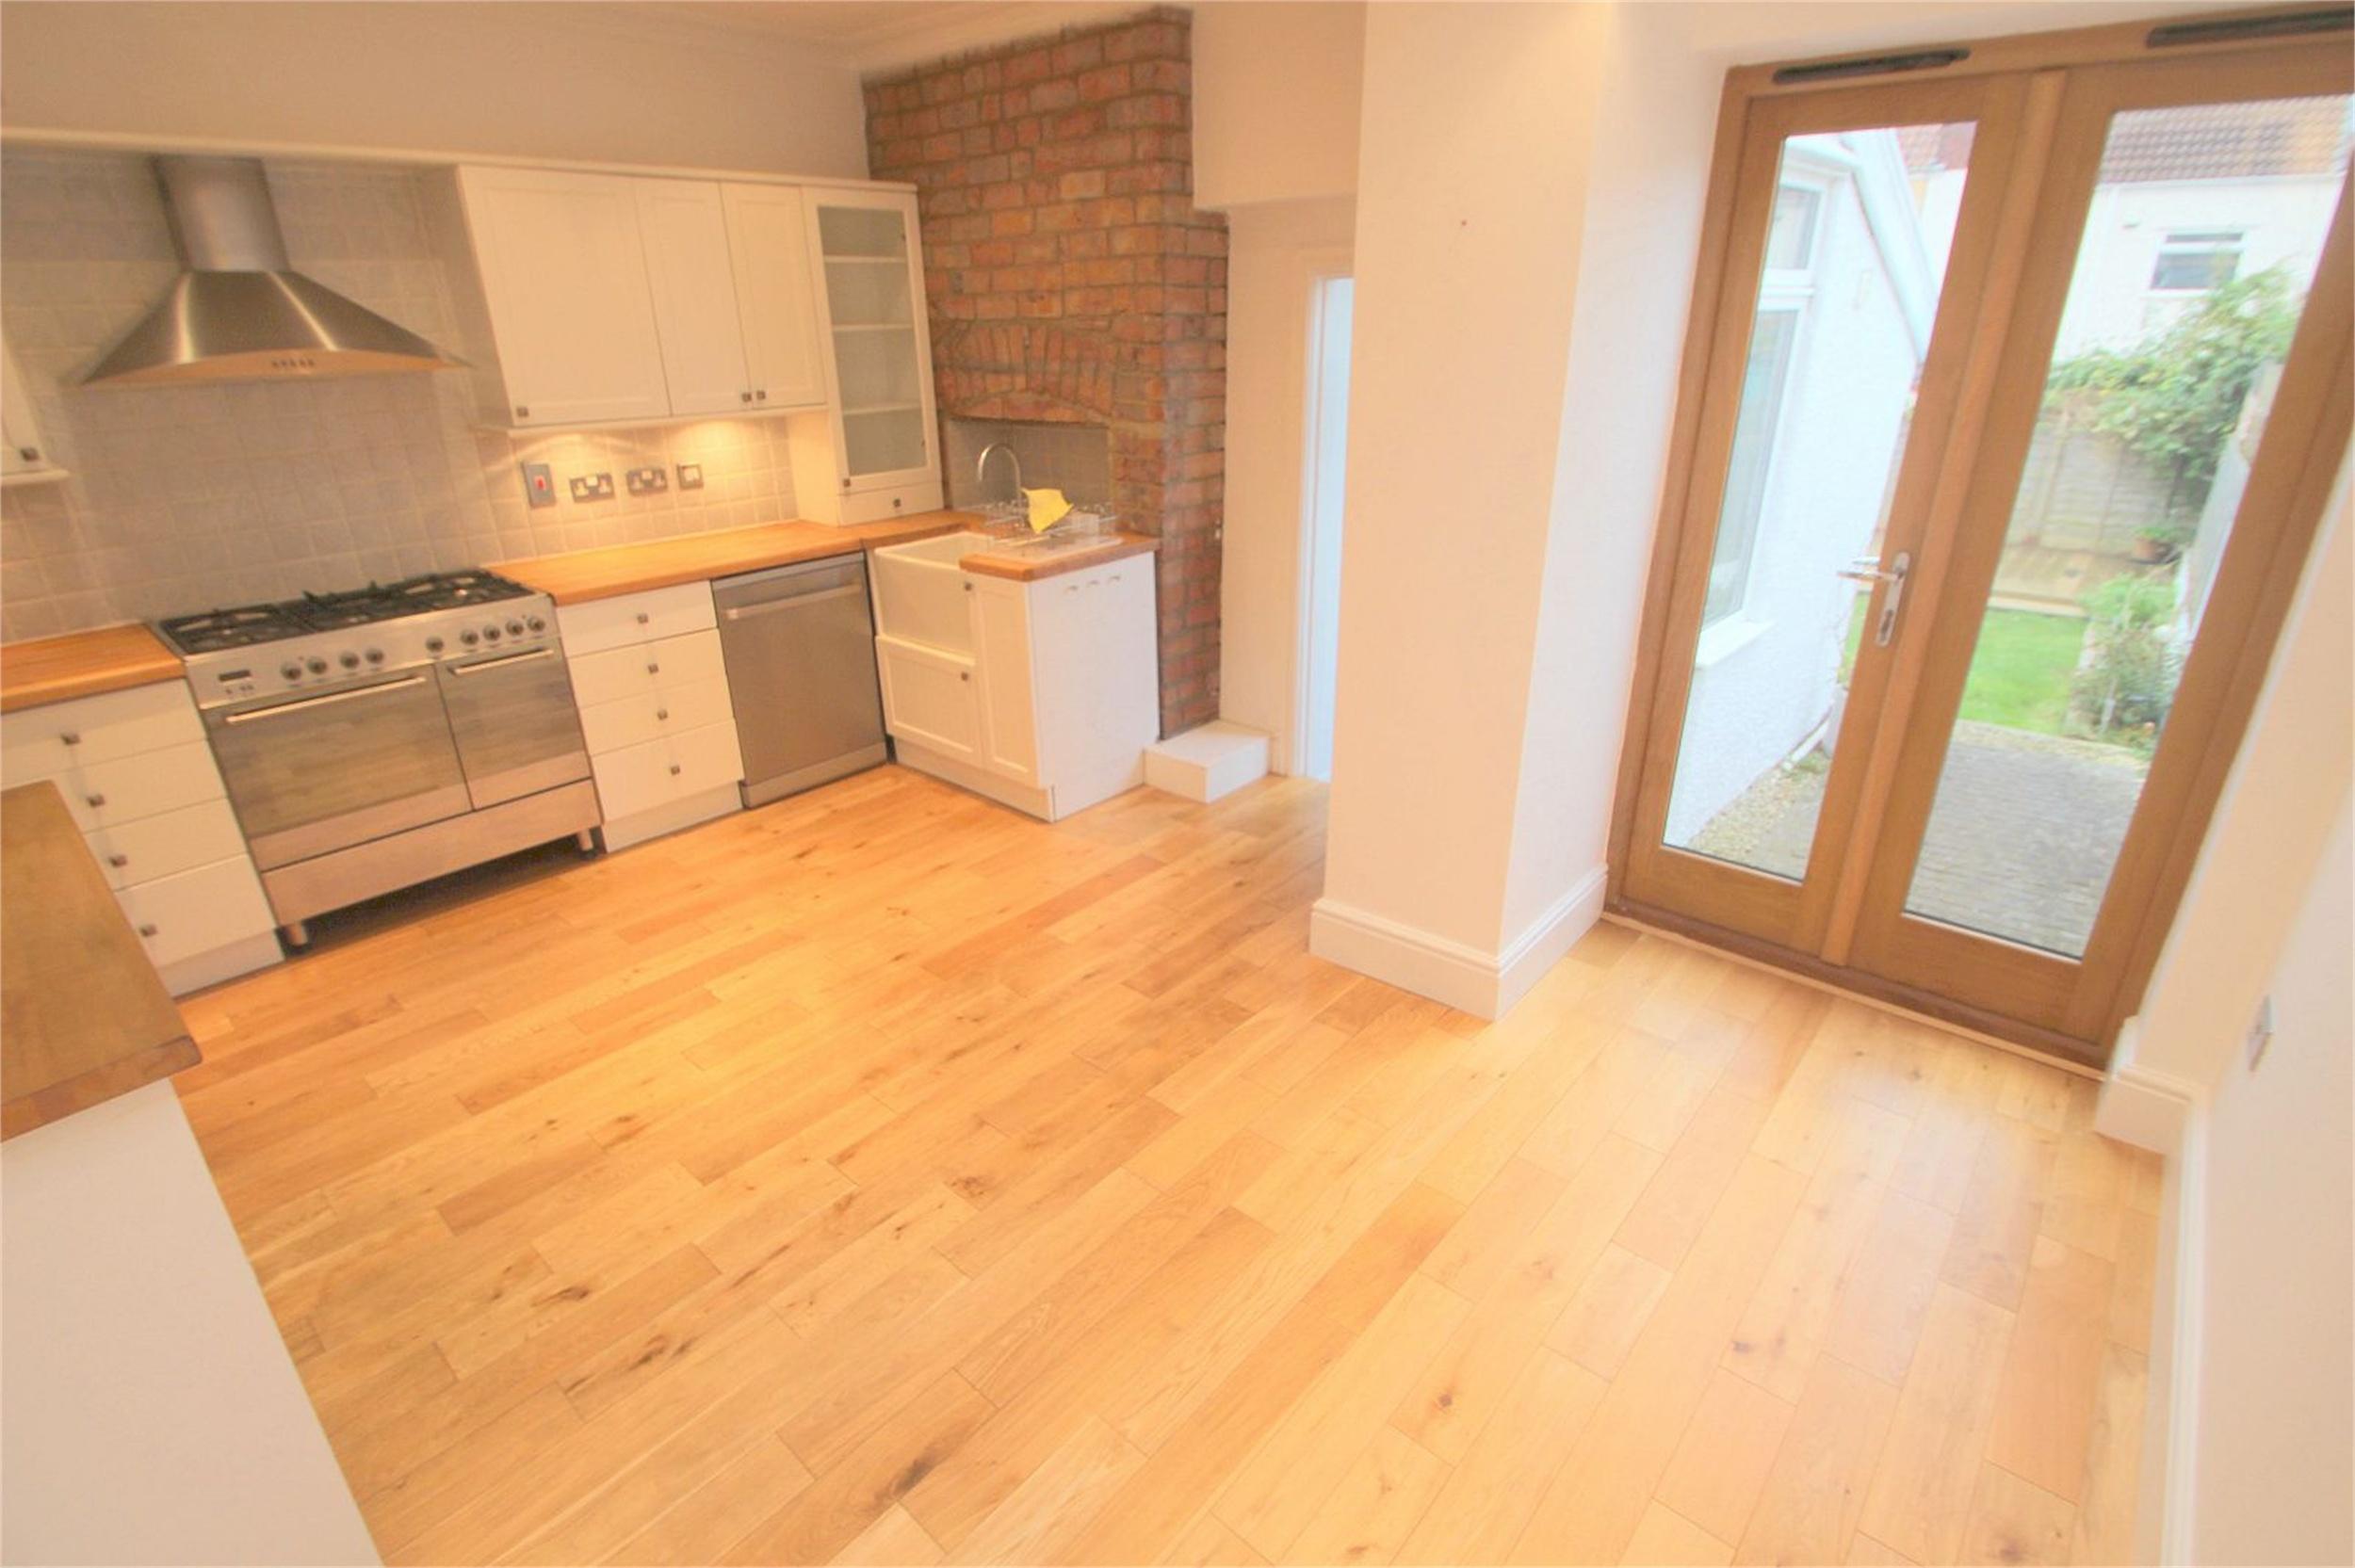 Cj Hole Southville 3 Bedroom House To Rent In Exeter Road